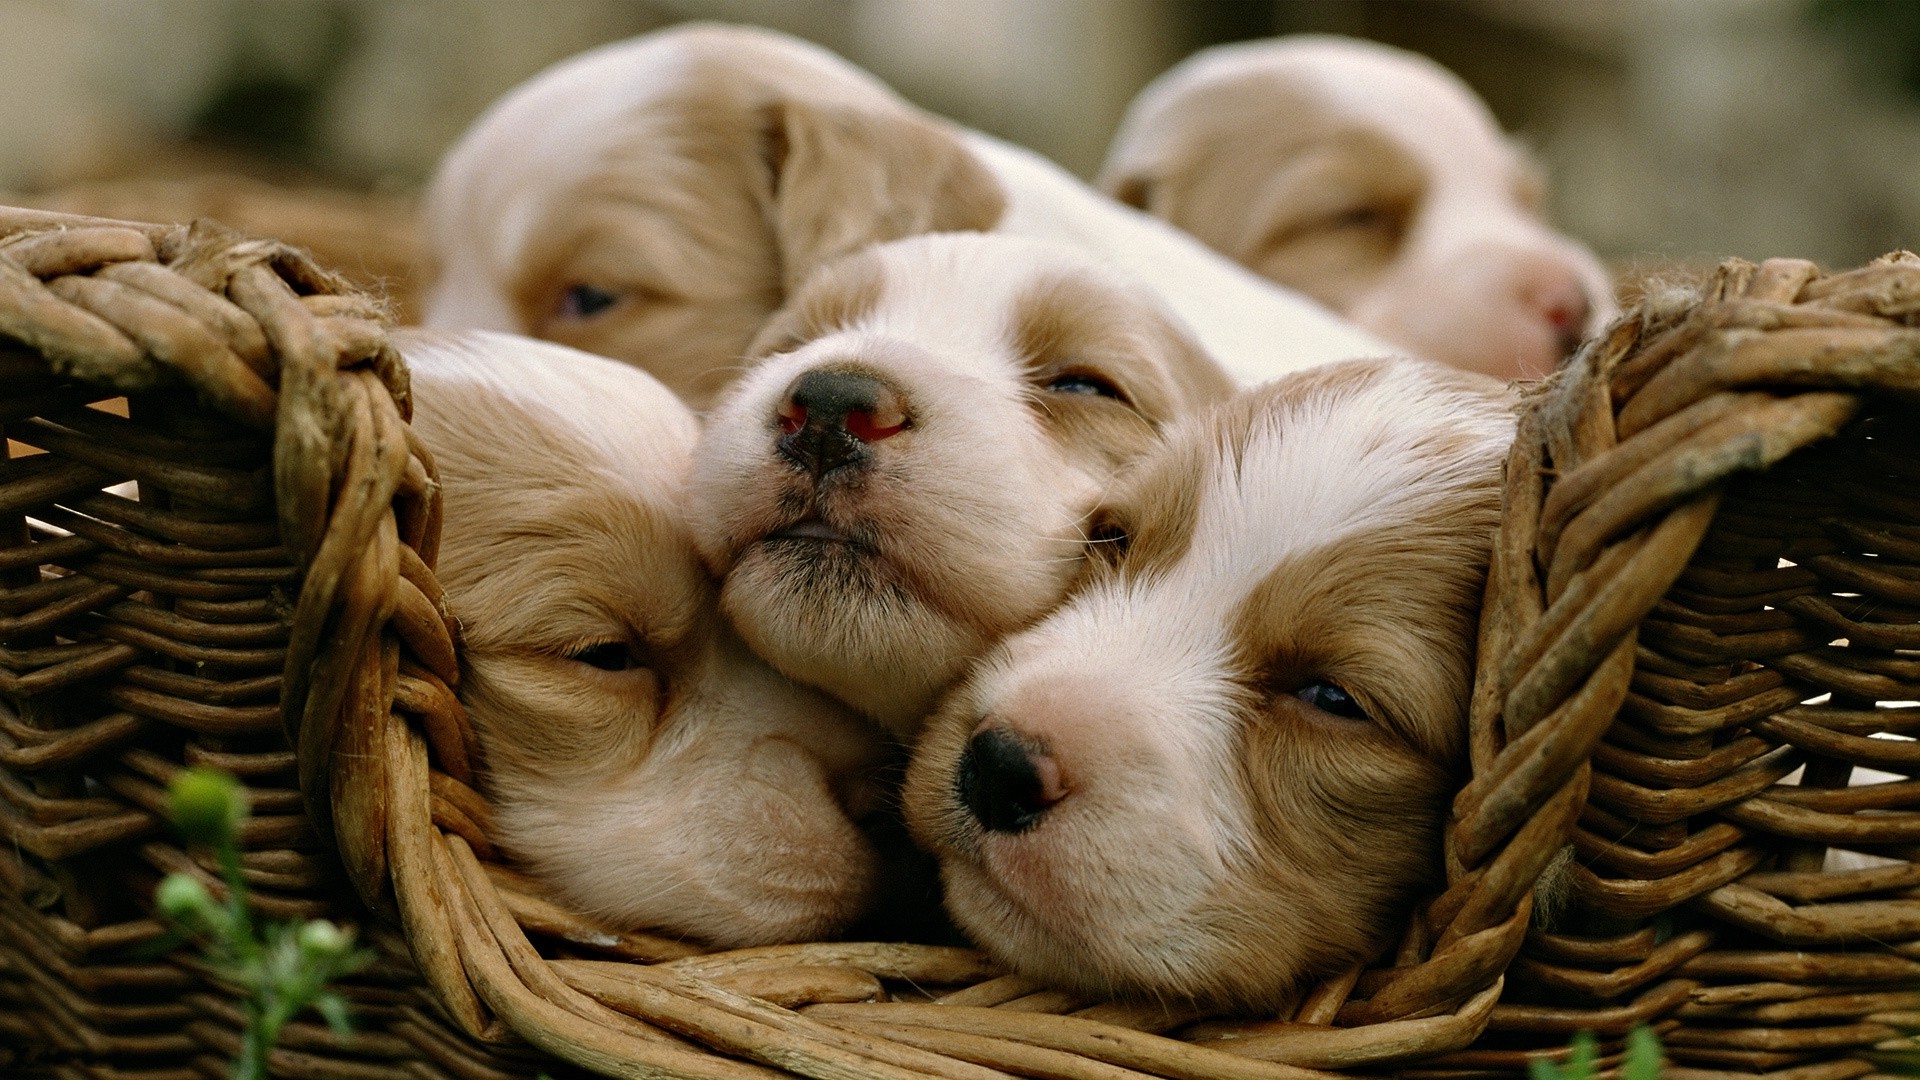 animals, Dog, Puppies, Baby Animals, Baskets Wallpapers HD ...